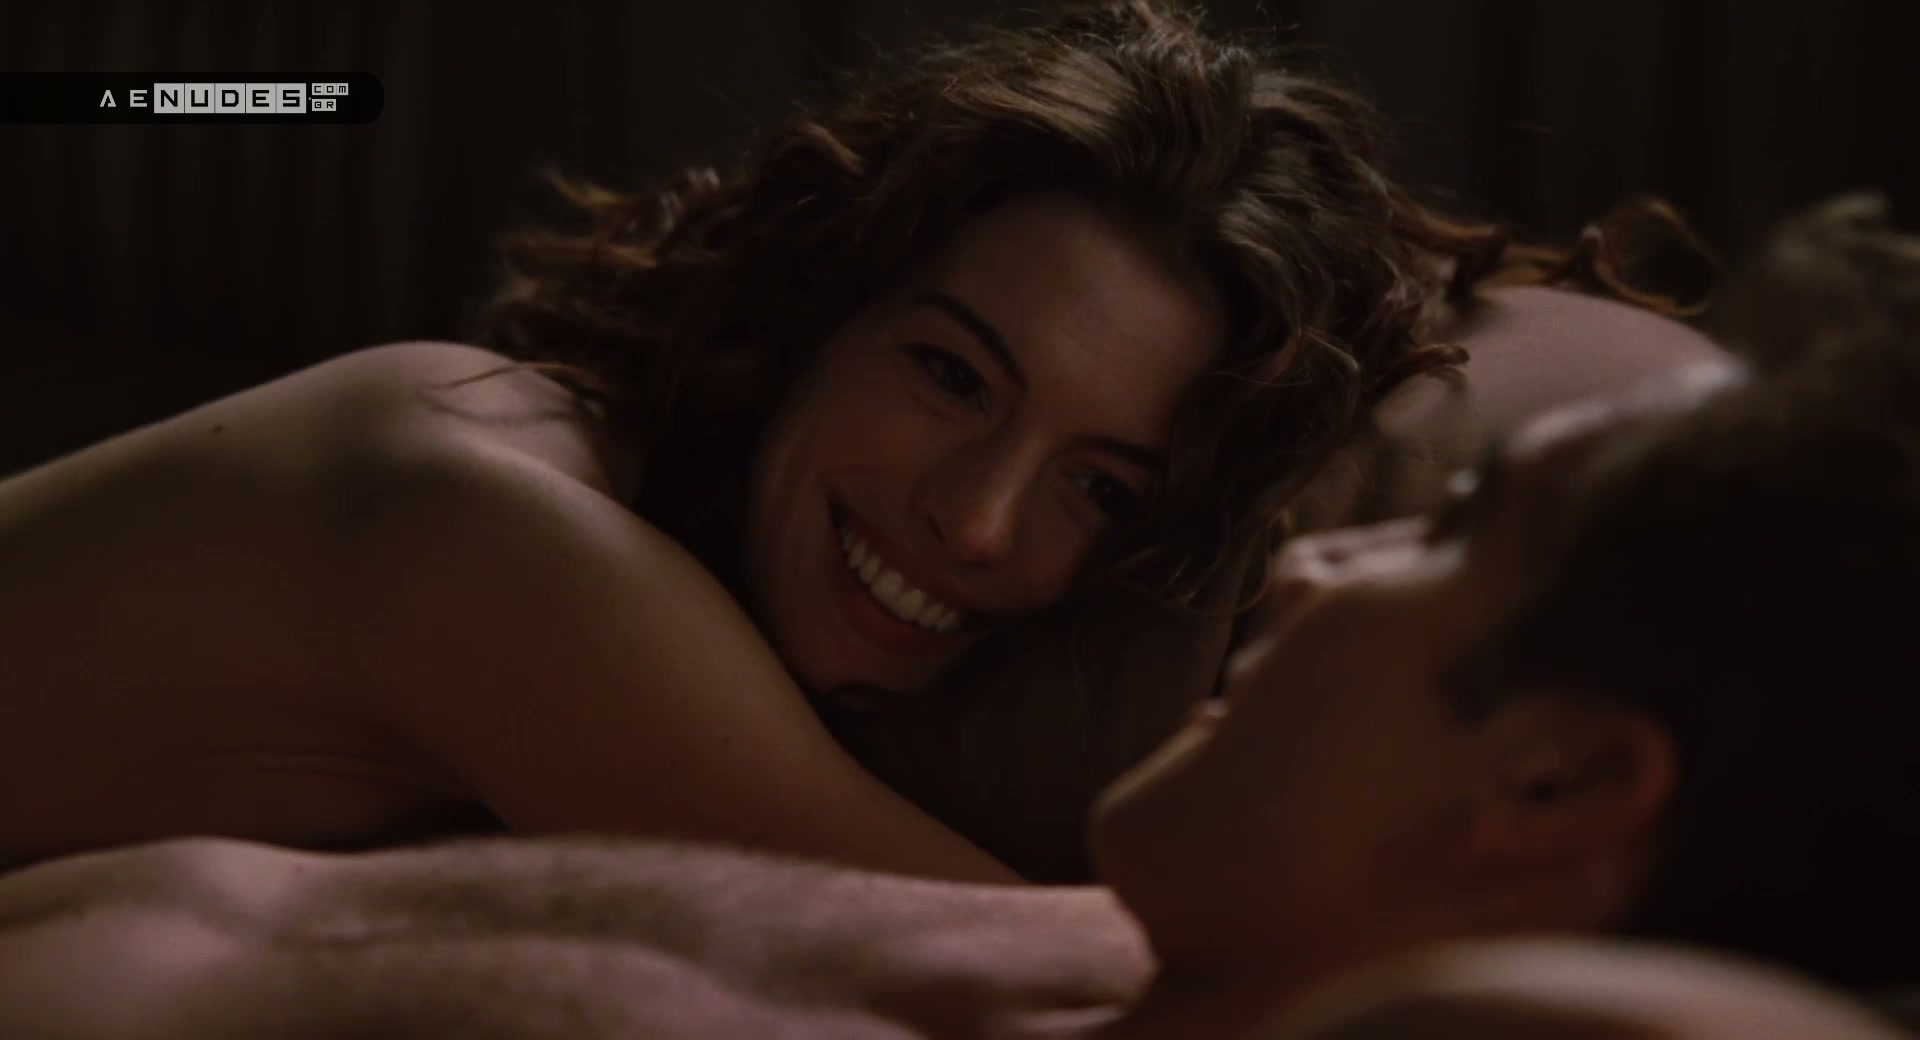  Anne Hathaway nua pelada em Love And Other Drugs